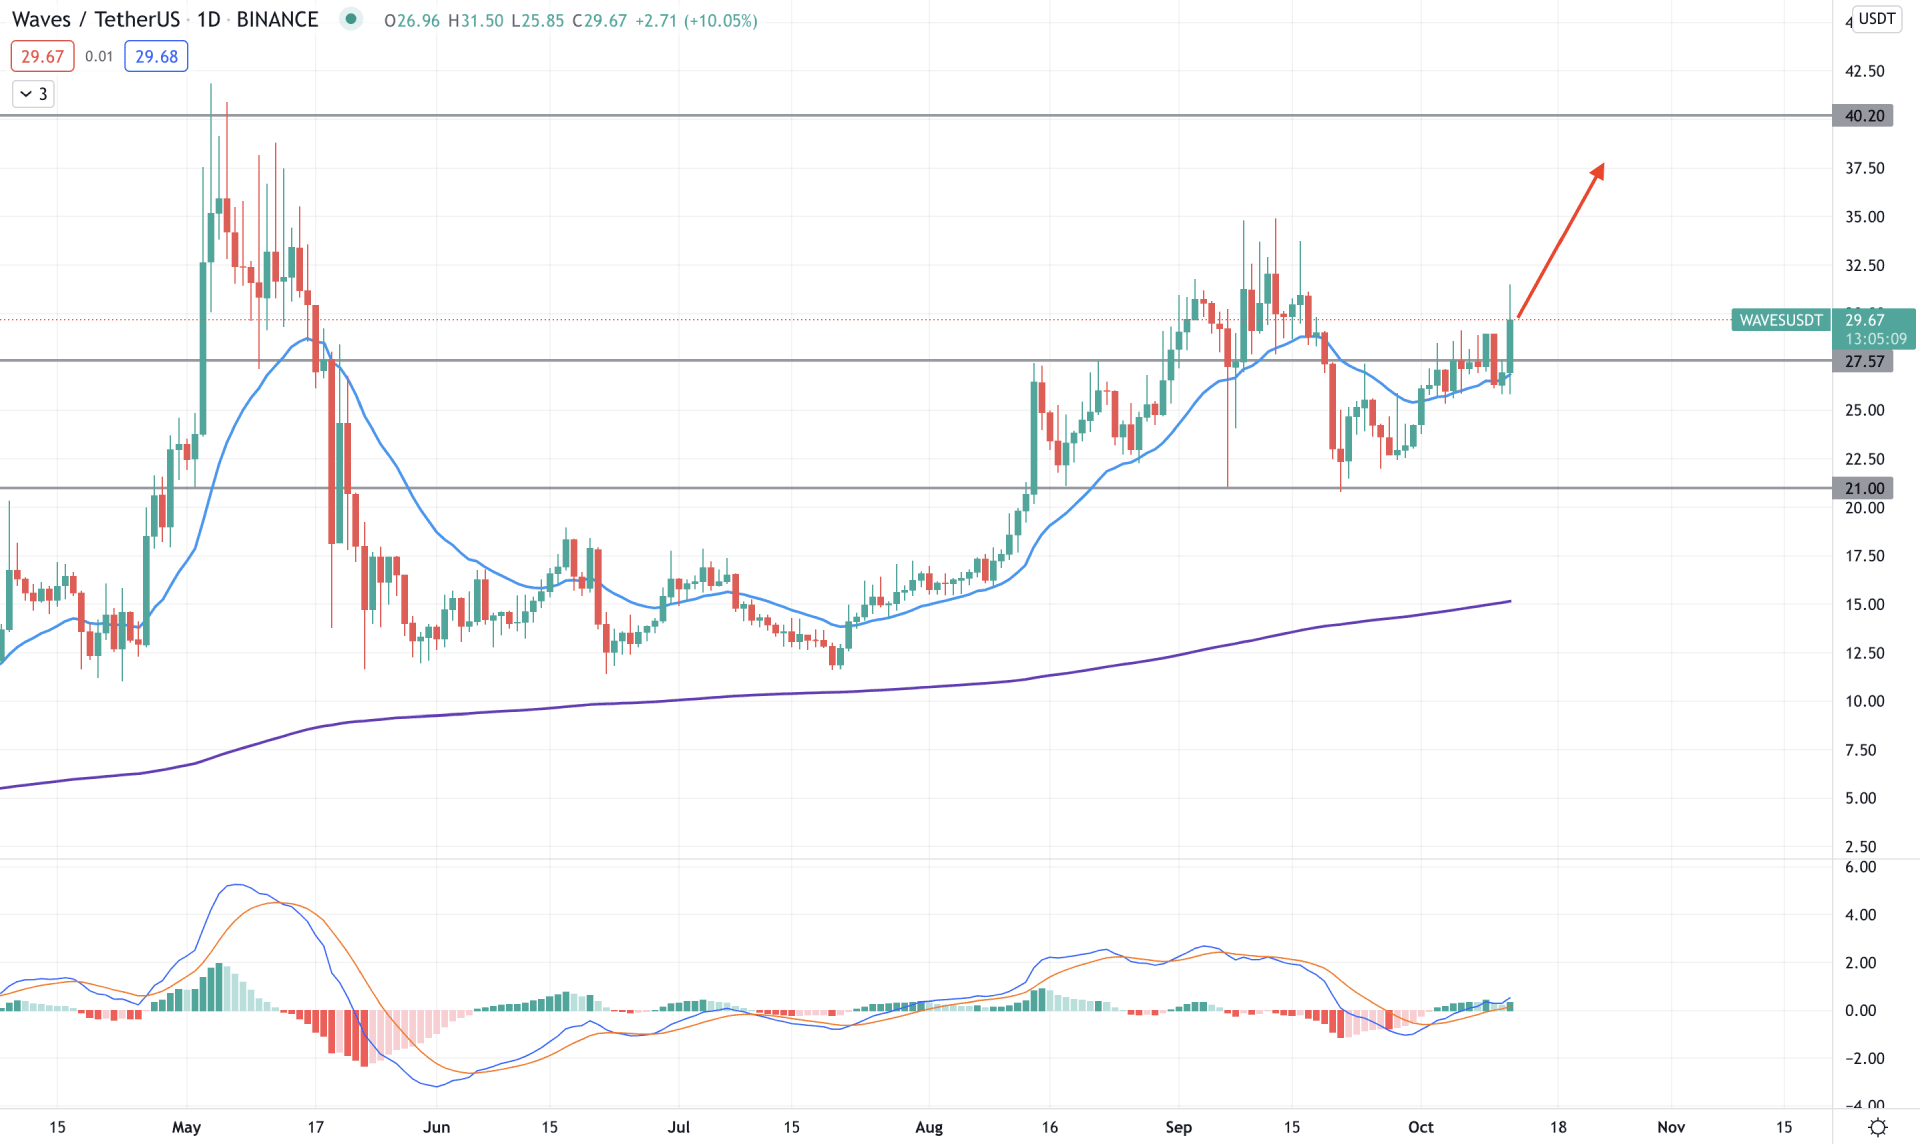 WAVE/USDT Daily Technical Analysis 12 October 2021